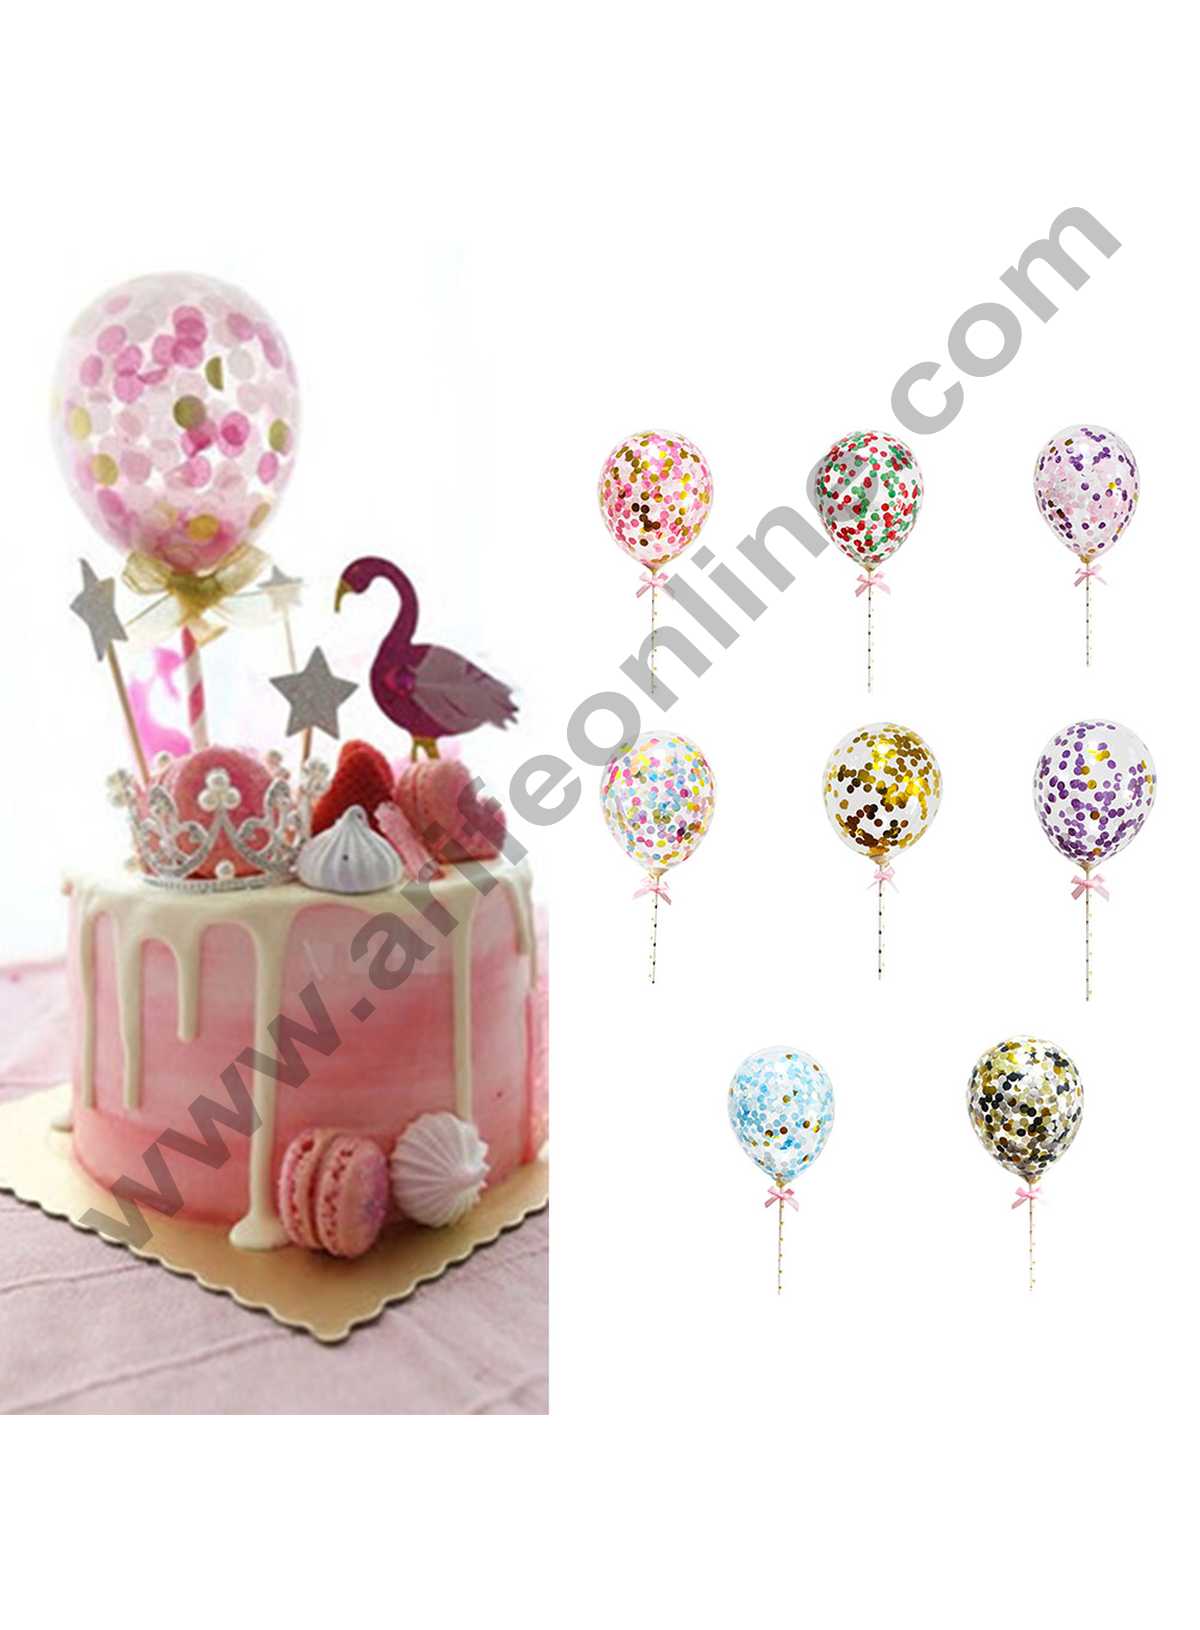 Hot Air Balloon Cloud Cake Toppers Party Birthday Baby Shower Wedding  Decoration | eBay